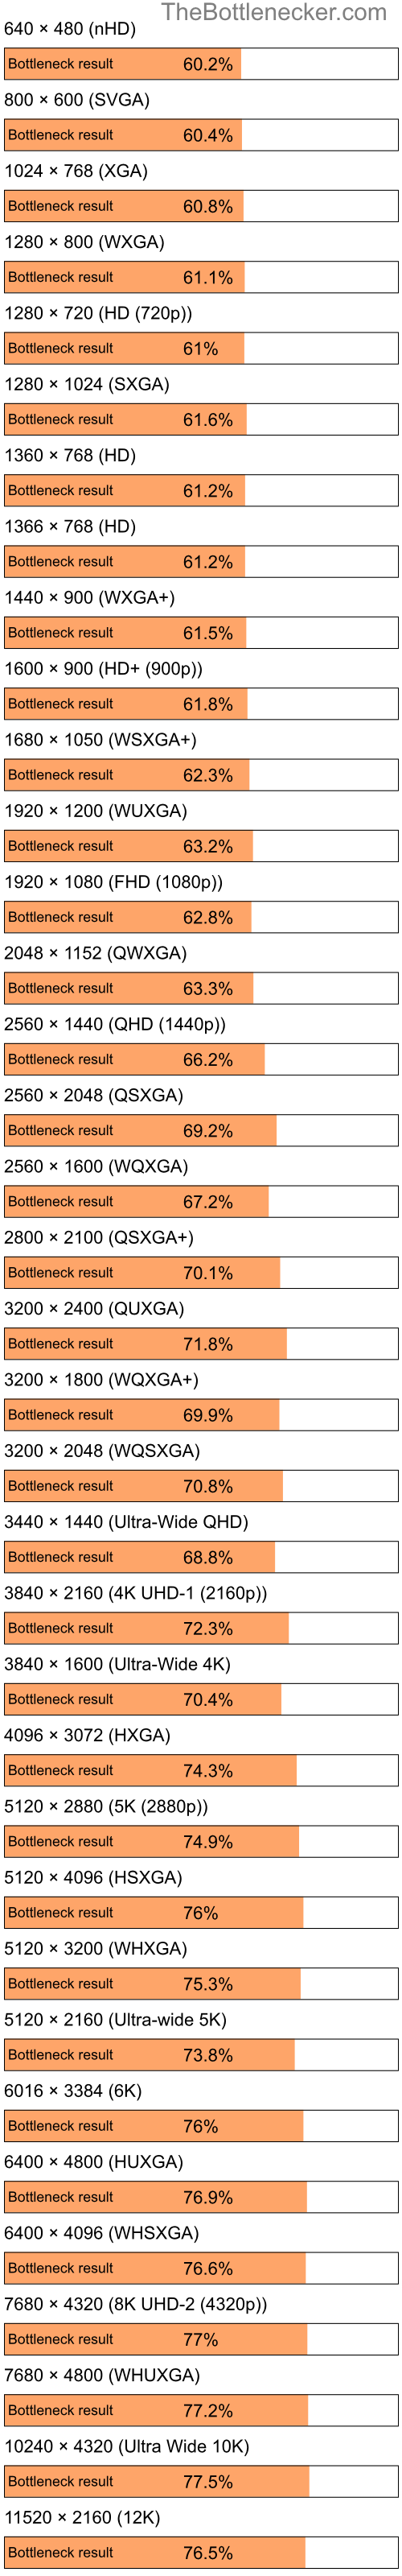 Bottleneck results by resolution for Intel Pentium 4 and AMD Radeon 3100 in Processor Intense Tasks